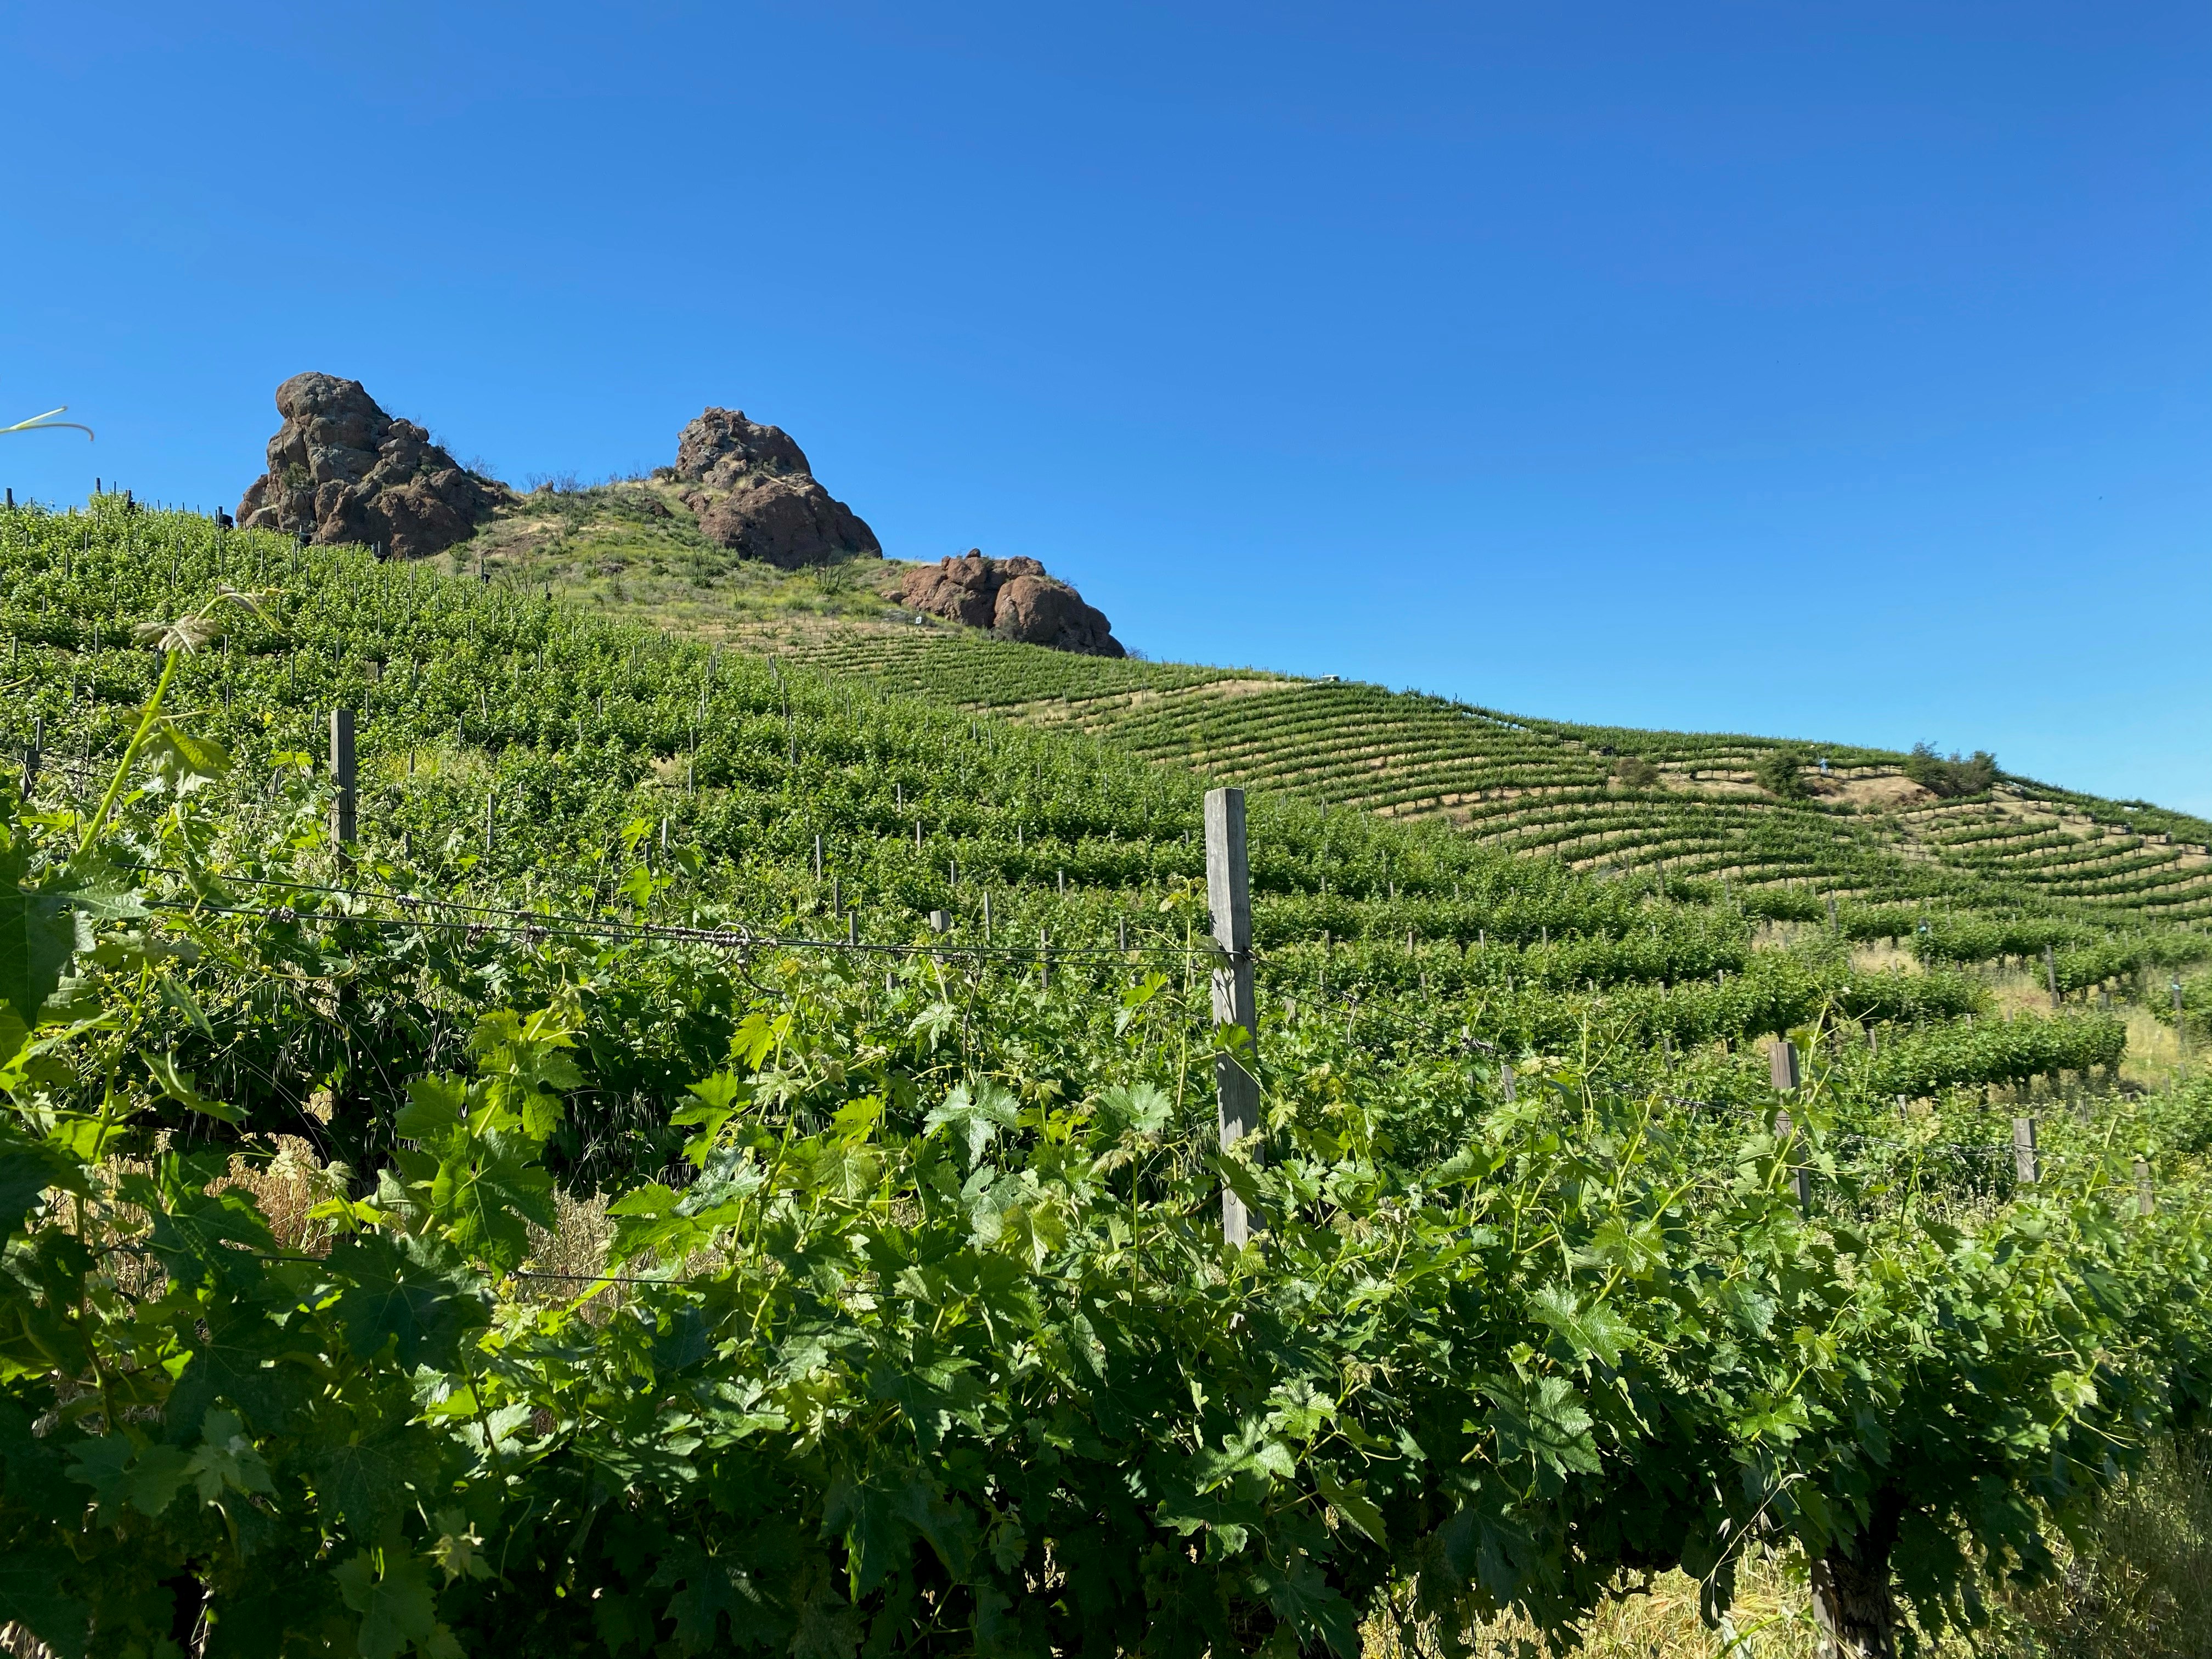 Green vines in a wine vineyard, with a blue sky above